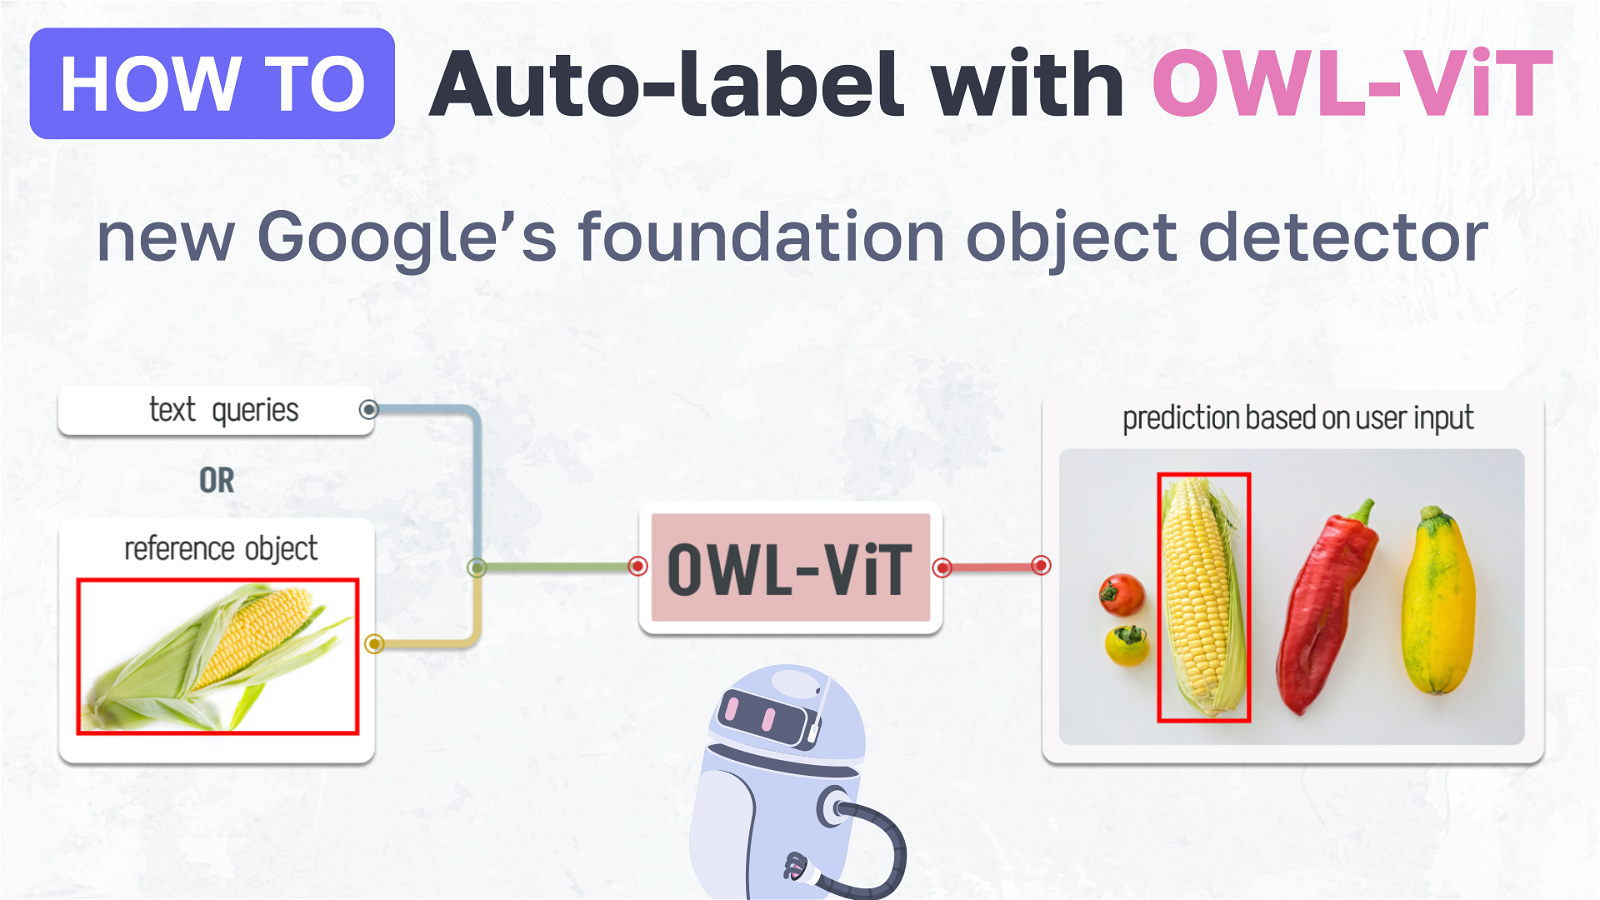 How to auto-label images with OWL-ViT - SOTA Google's foundation object detector